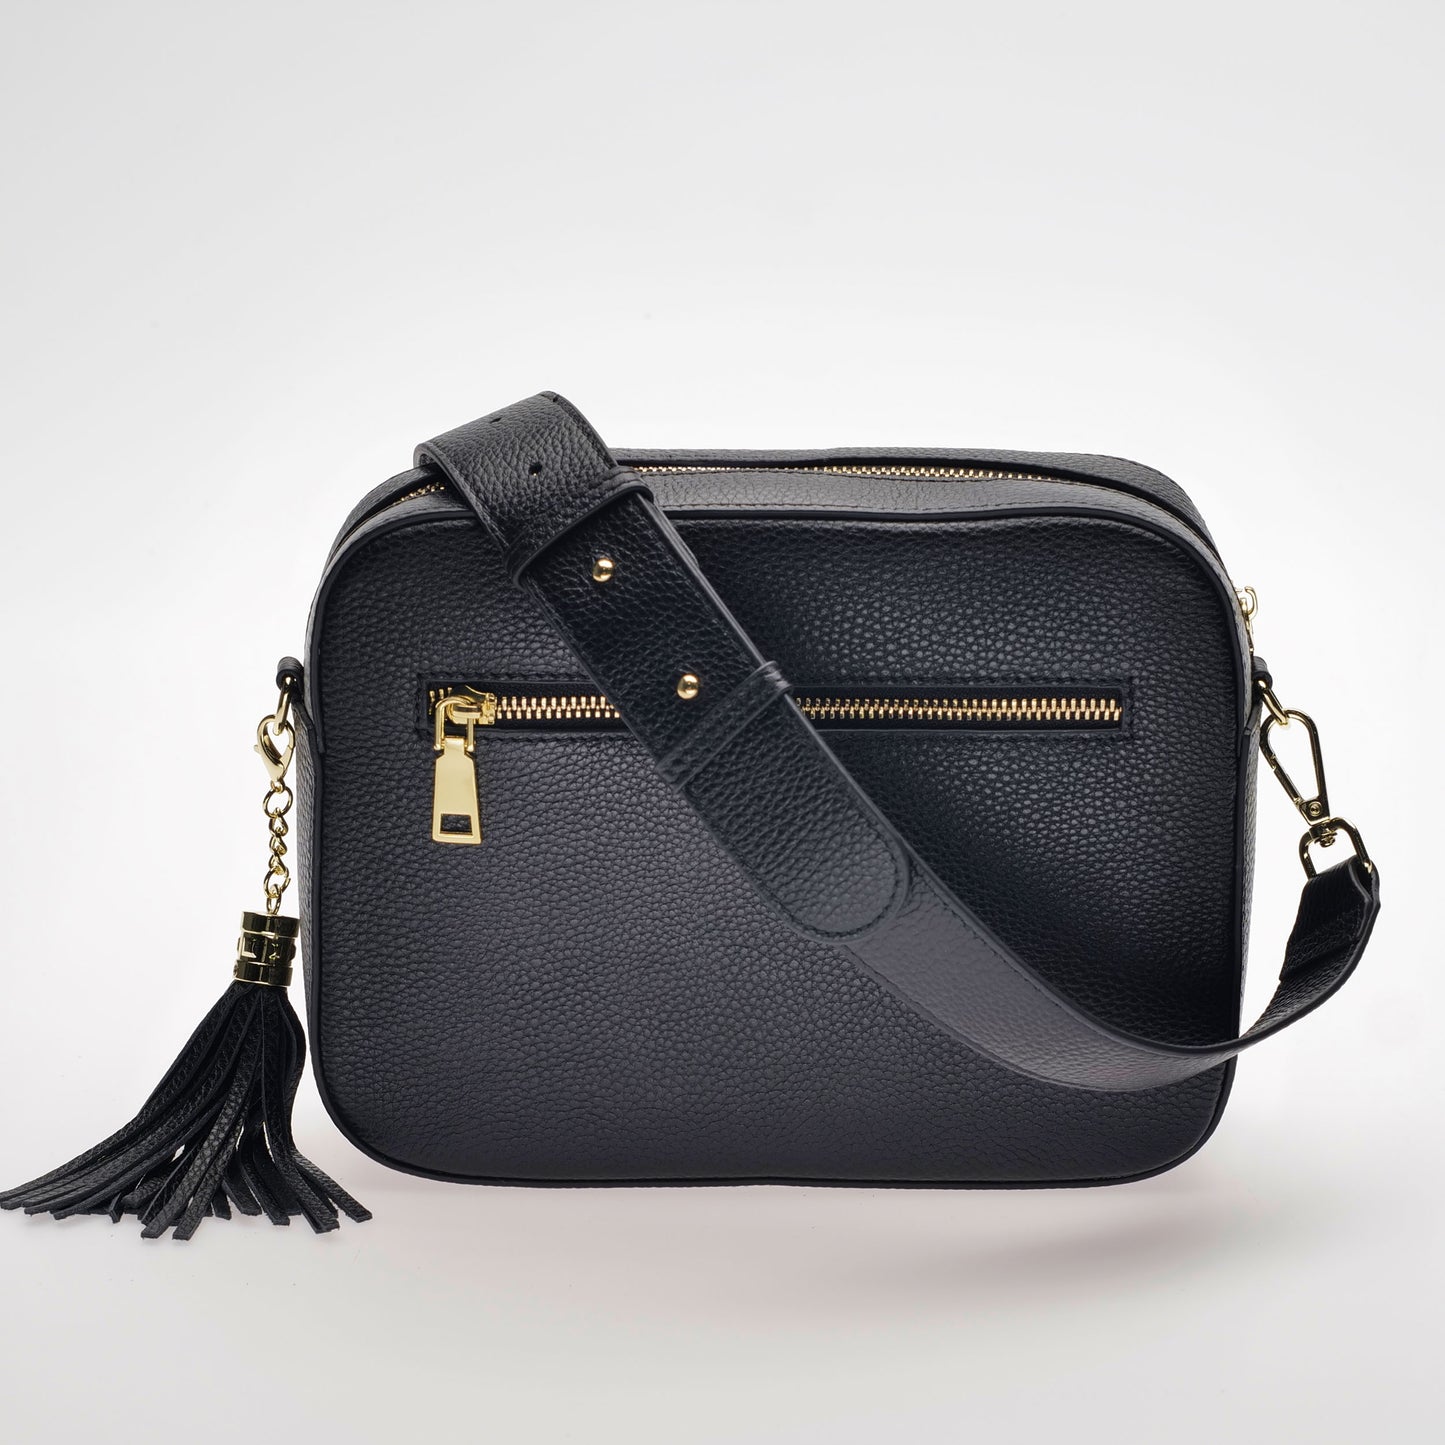 Stratford Crossbody Bag - Midnight Black - With Matching Leather Strap